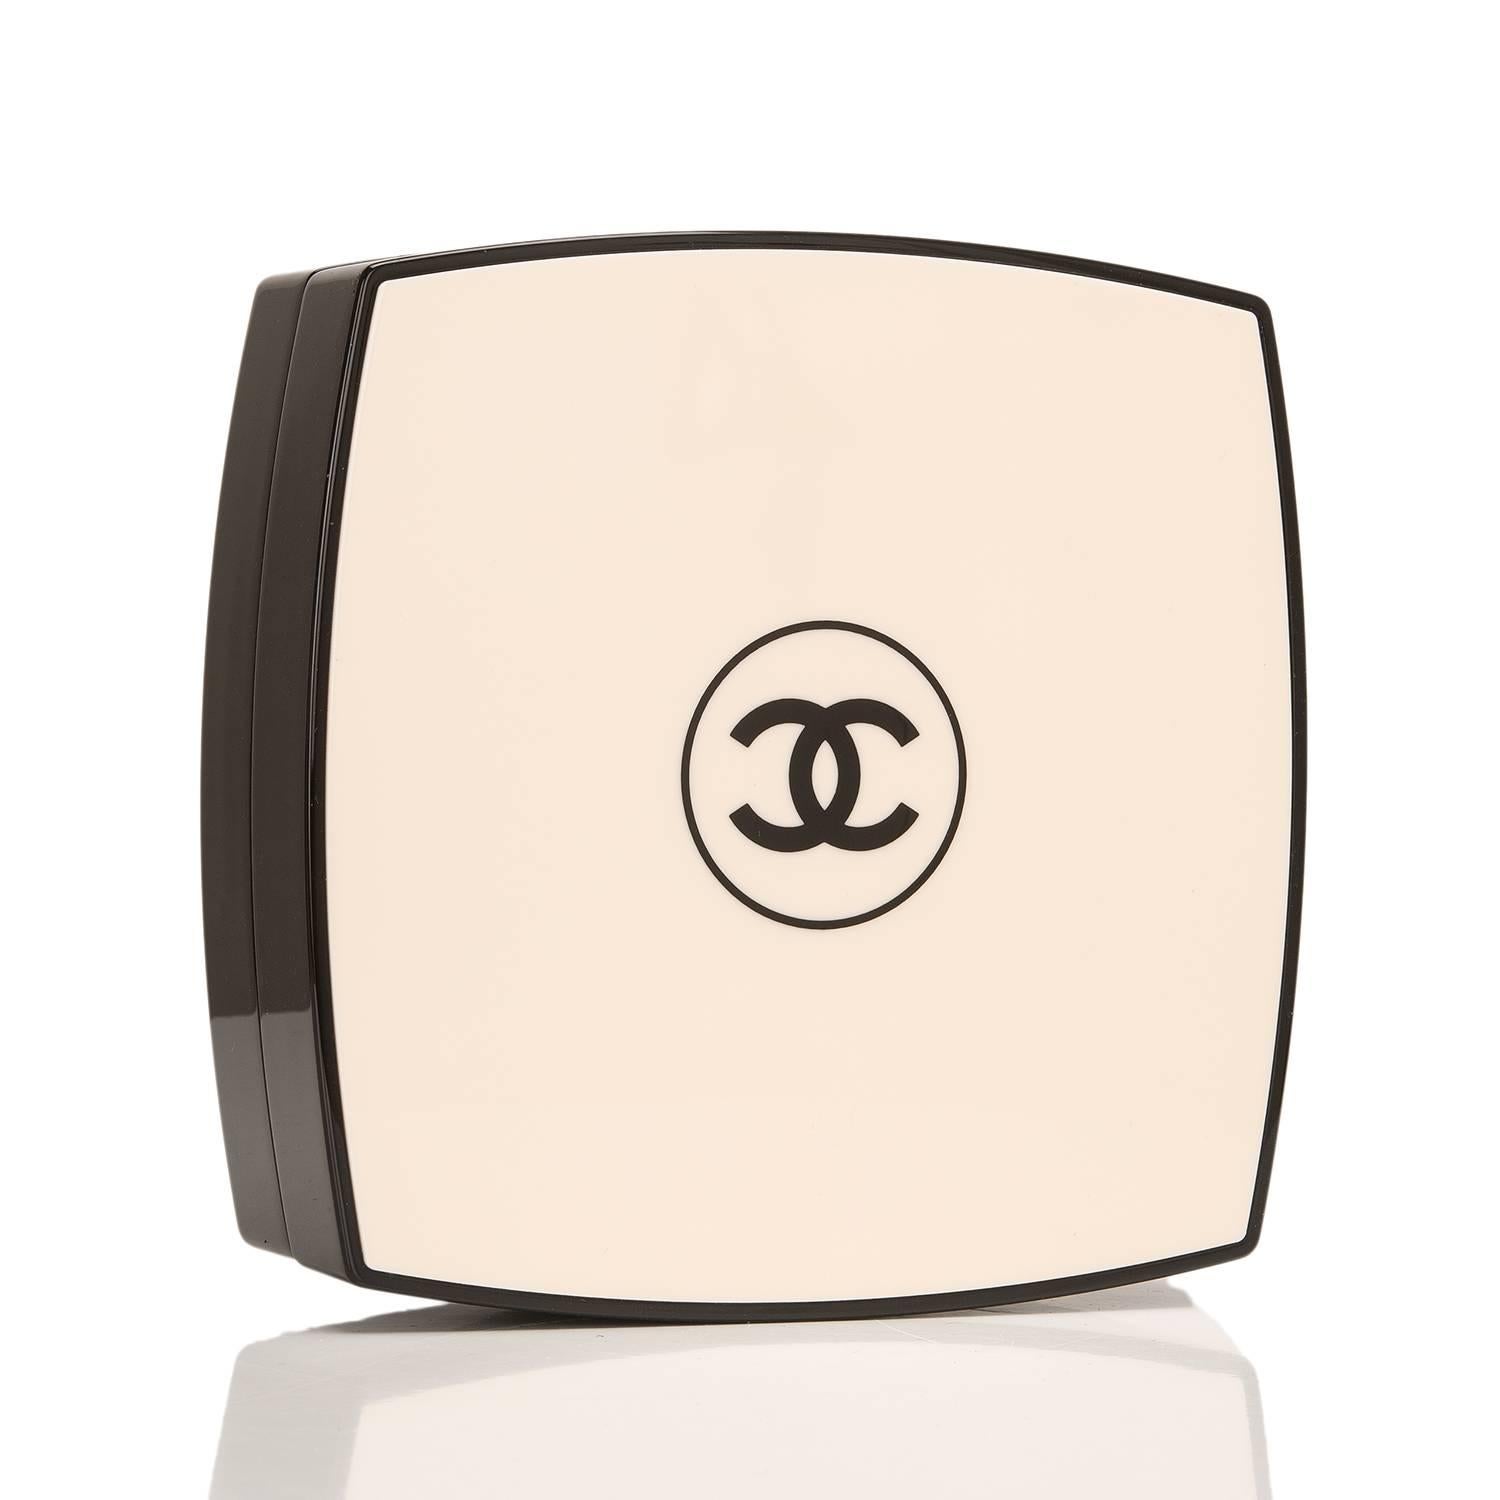 Chanel limited edition, runway Compact Powder minaudiere of white and black plexiglass with silver tone metal hardware.

This rare, collectible clutch features Chanel's signature CC logo encircled on the front, a CHANEL engraved top snap closure,